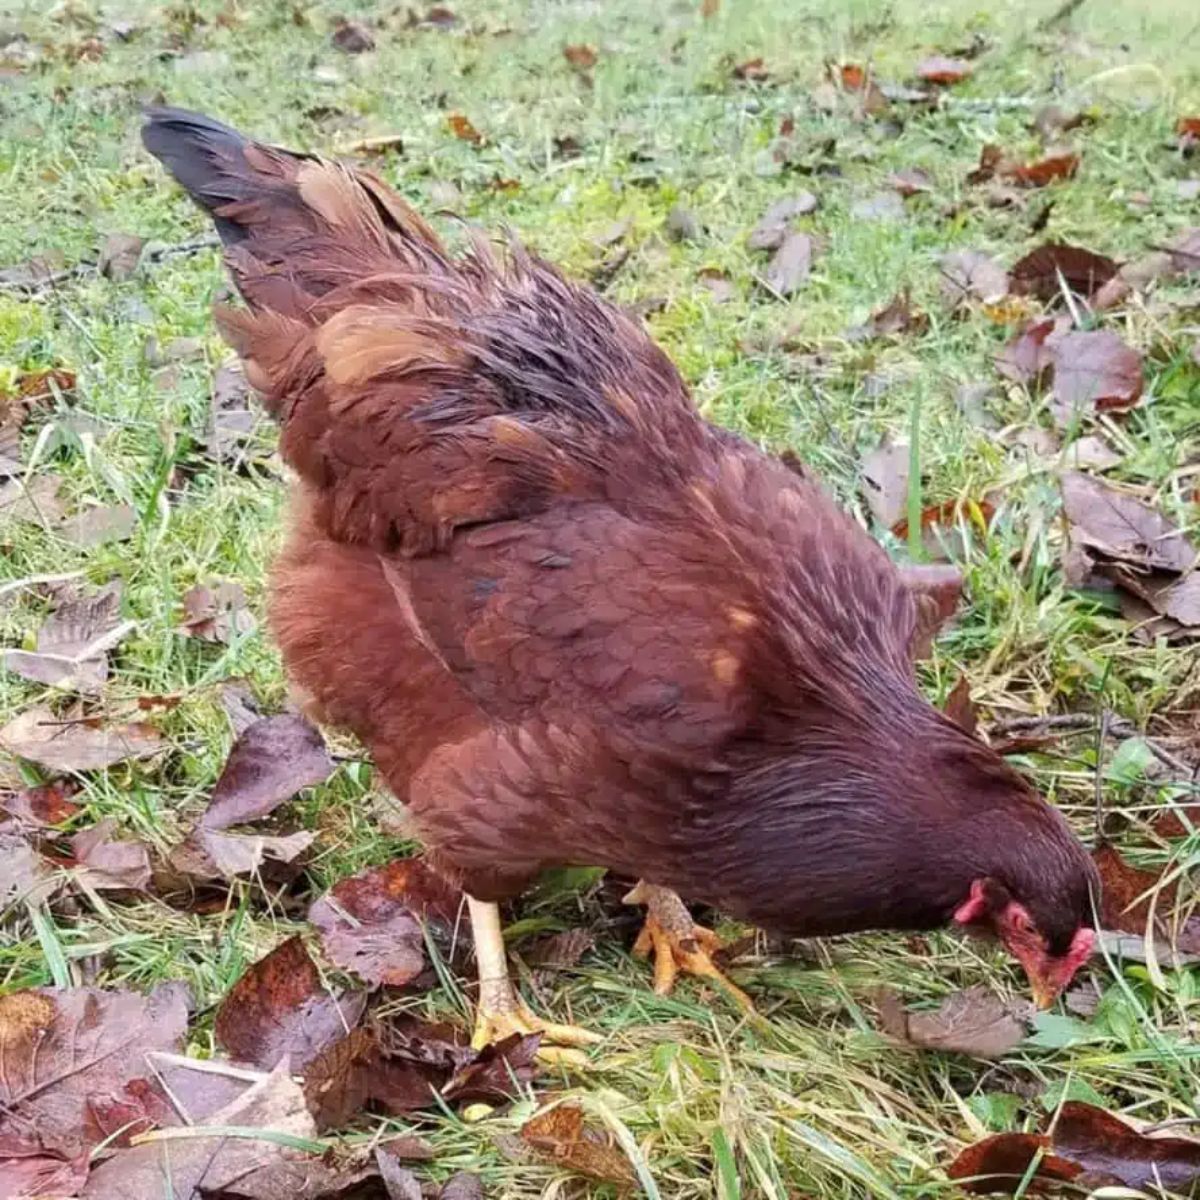 A brown Buckeye Chicken gobbling on a pasture.